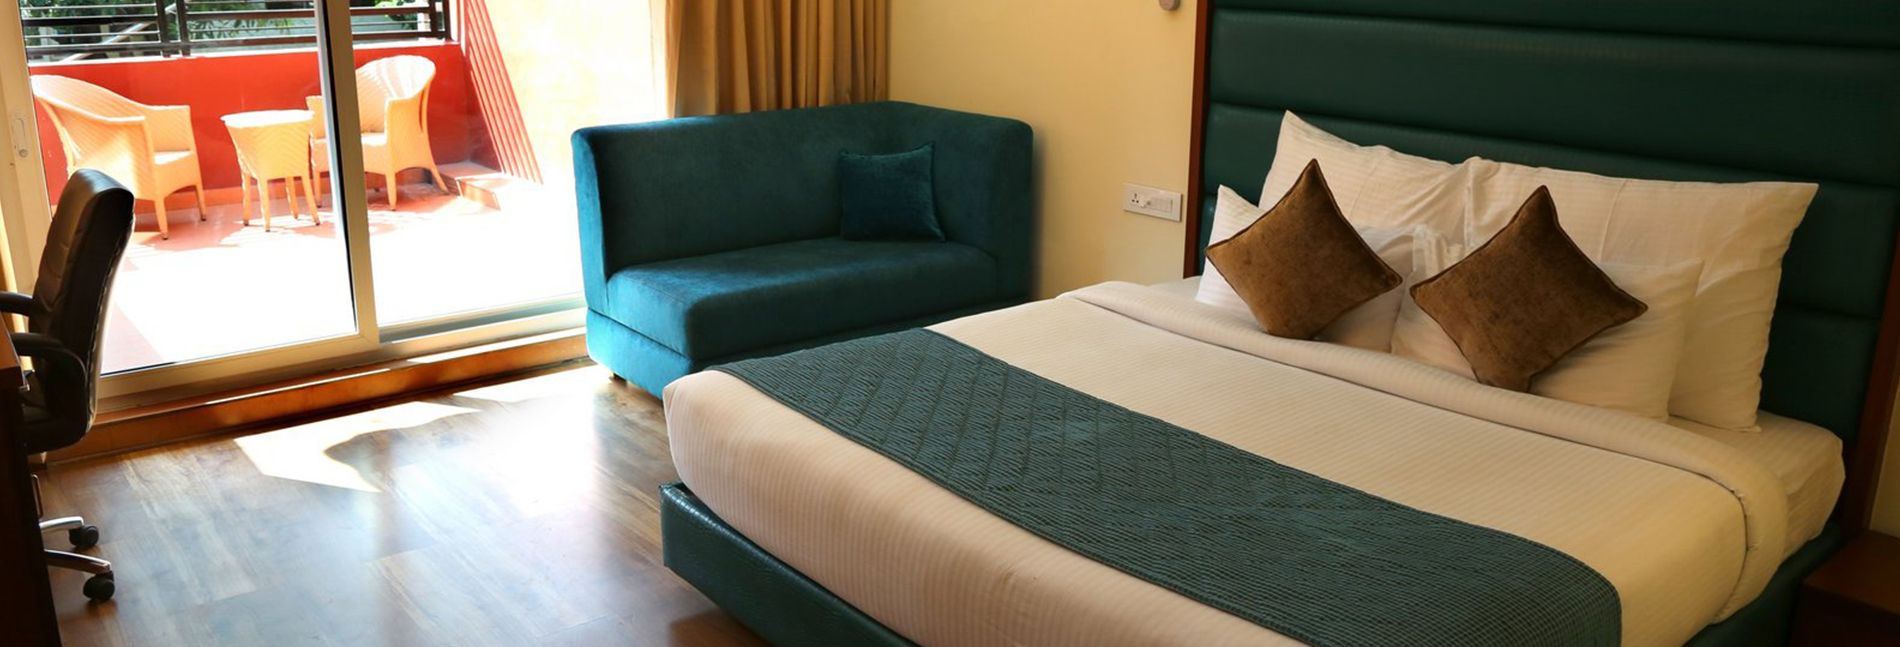 Three Star Hotel for Comfortable Stay, Cheaper Prices in Luxurious Rooms in Mohali near Chandigarh, Hotel Near to Mohali Industrial Area and Mohali PCA Stadium.